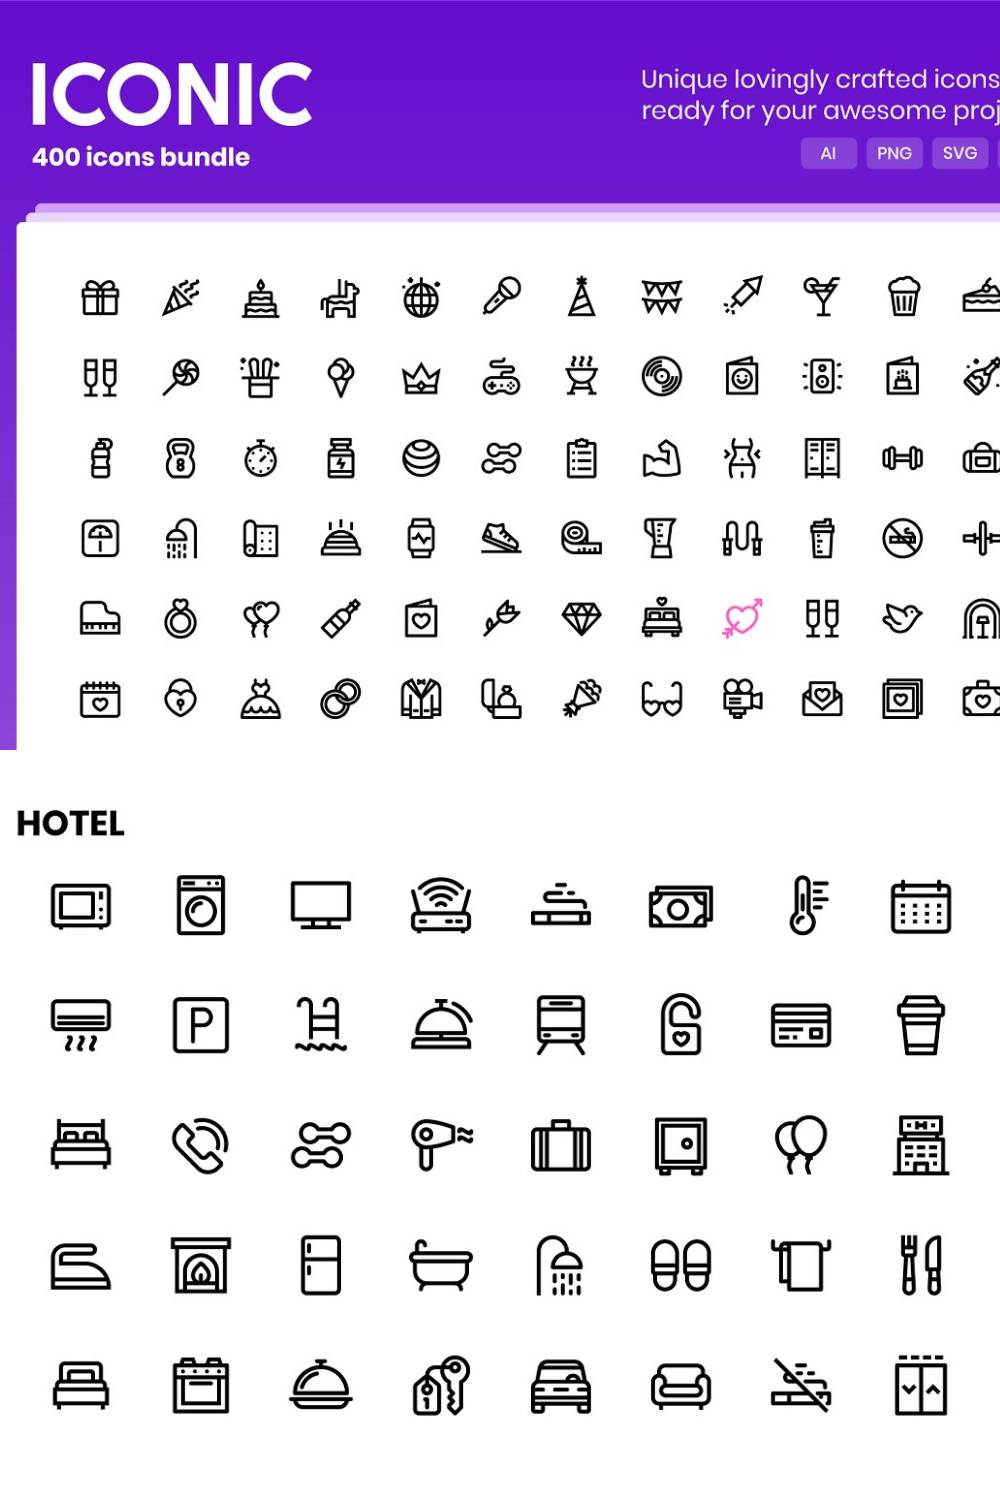 Iconic - 400 Vector Line Icons Pinterest Cover.